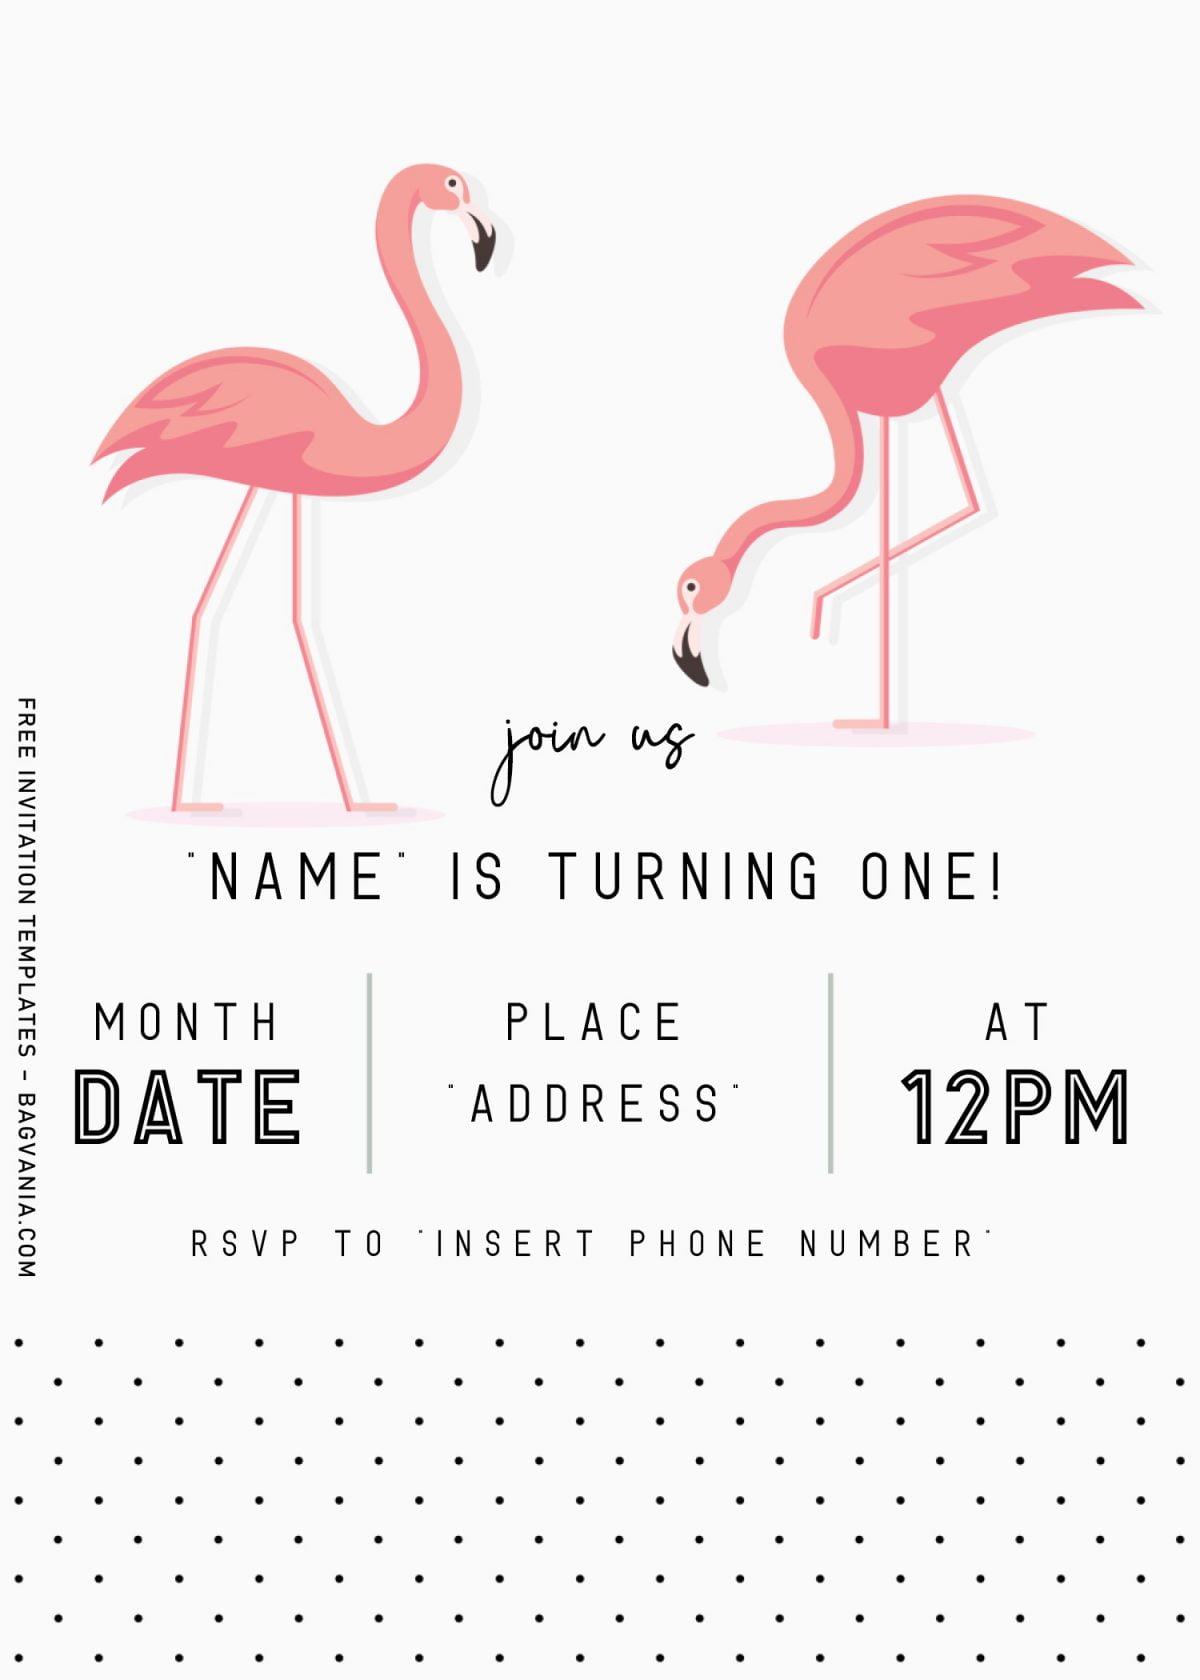 Flamingo Birthday Invitation Templates - Editable With Microsoft Word and has solid white background